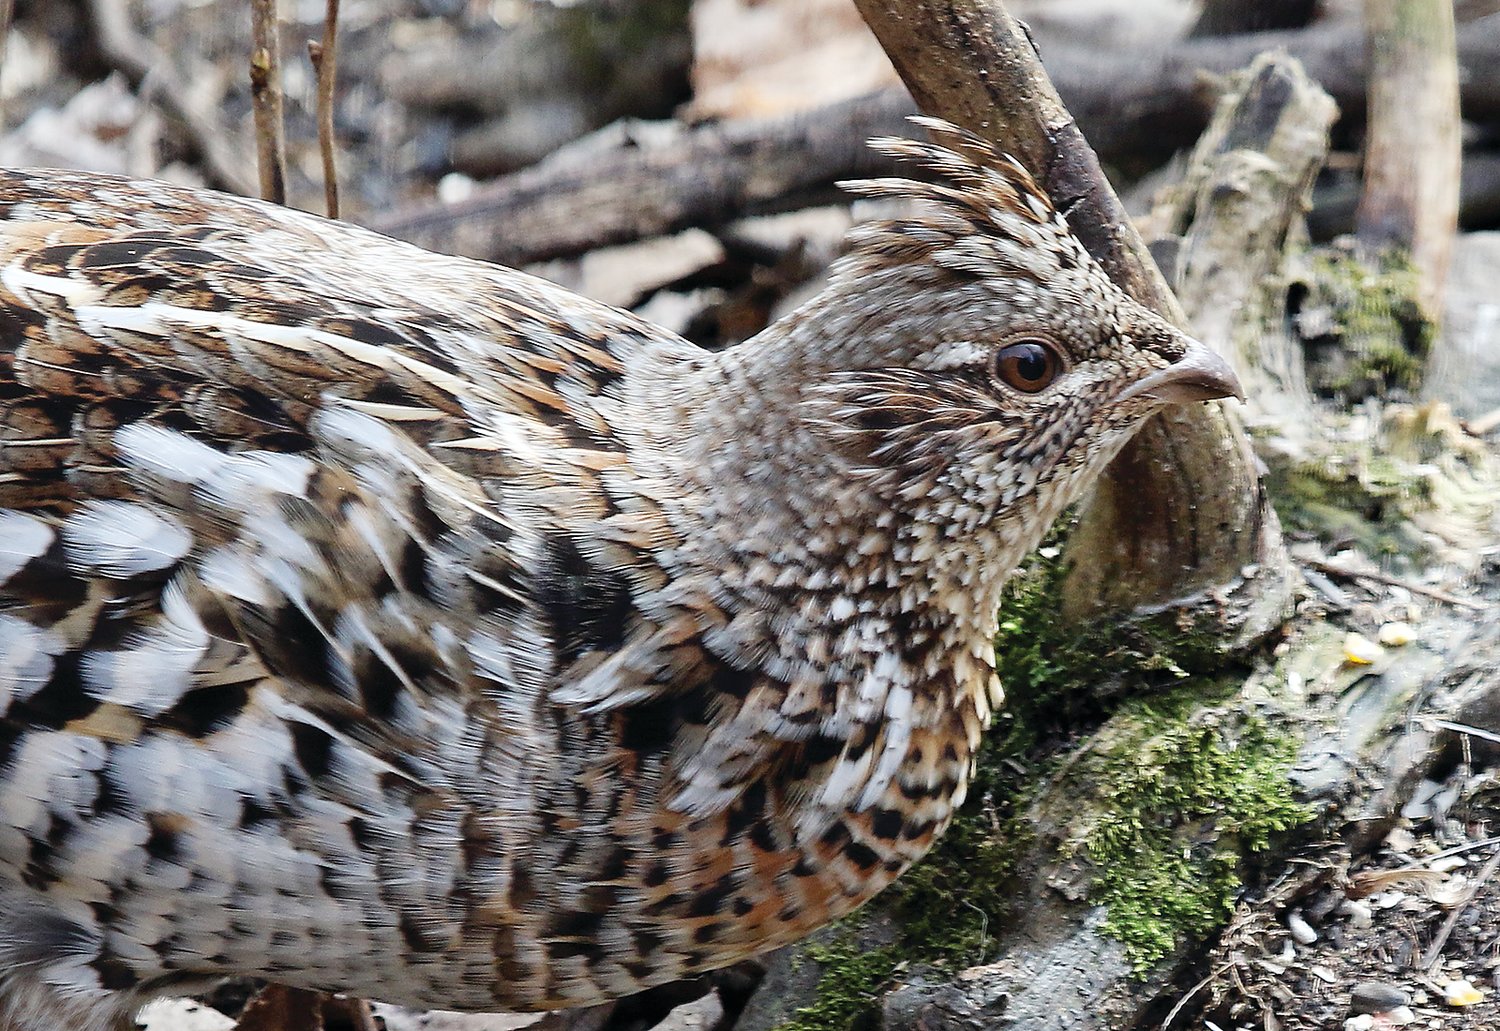 Hunters will be on the lookout for ruffed grouse 
beginning this weekend.